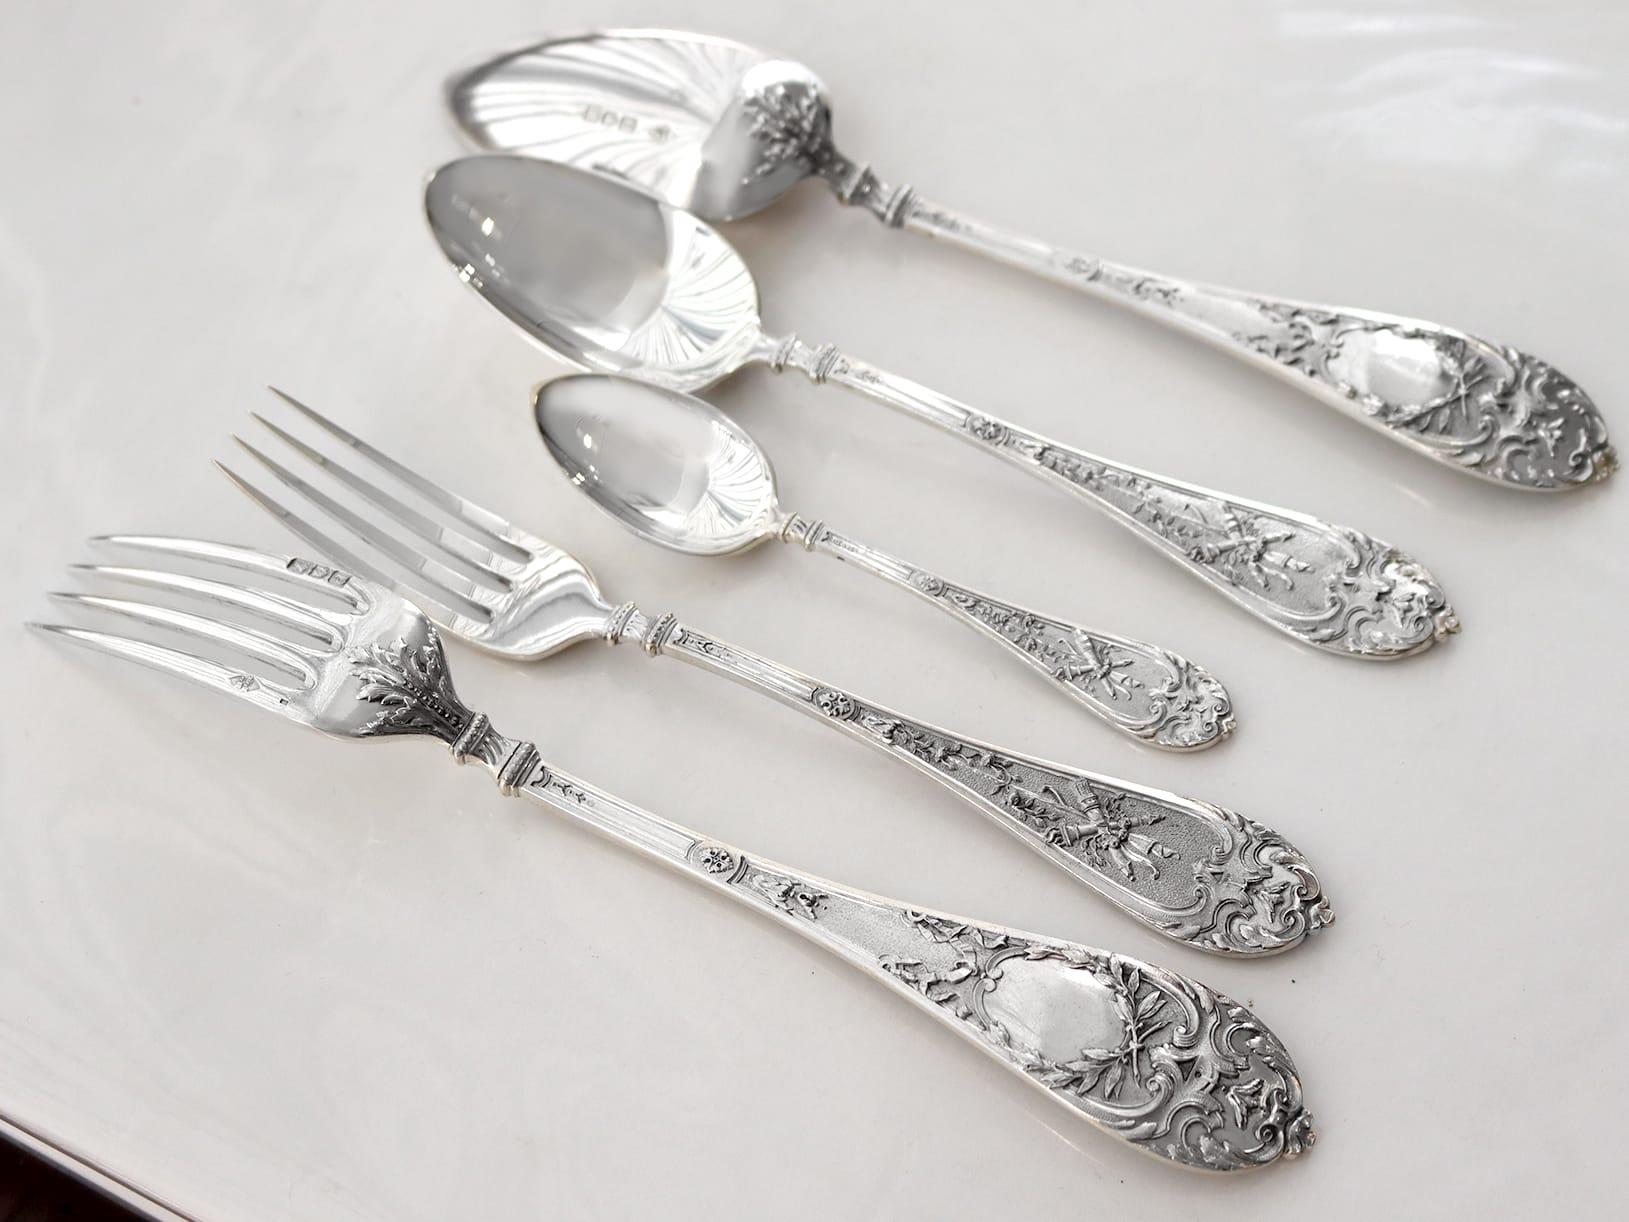 An exceptional, fine and impressive antique Victorian sterling silver flatware service for twelve persons; an addition to our diverse silver cutlery collection.

The pieces of this exceptional antique Victorian sterling silver flatware service for